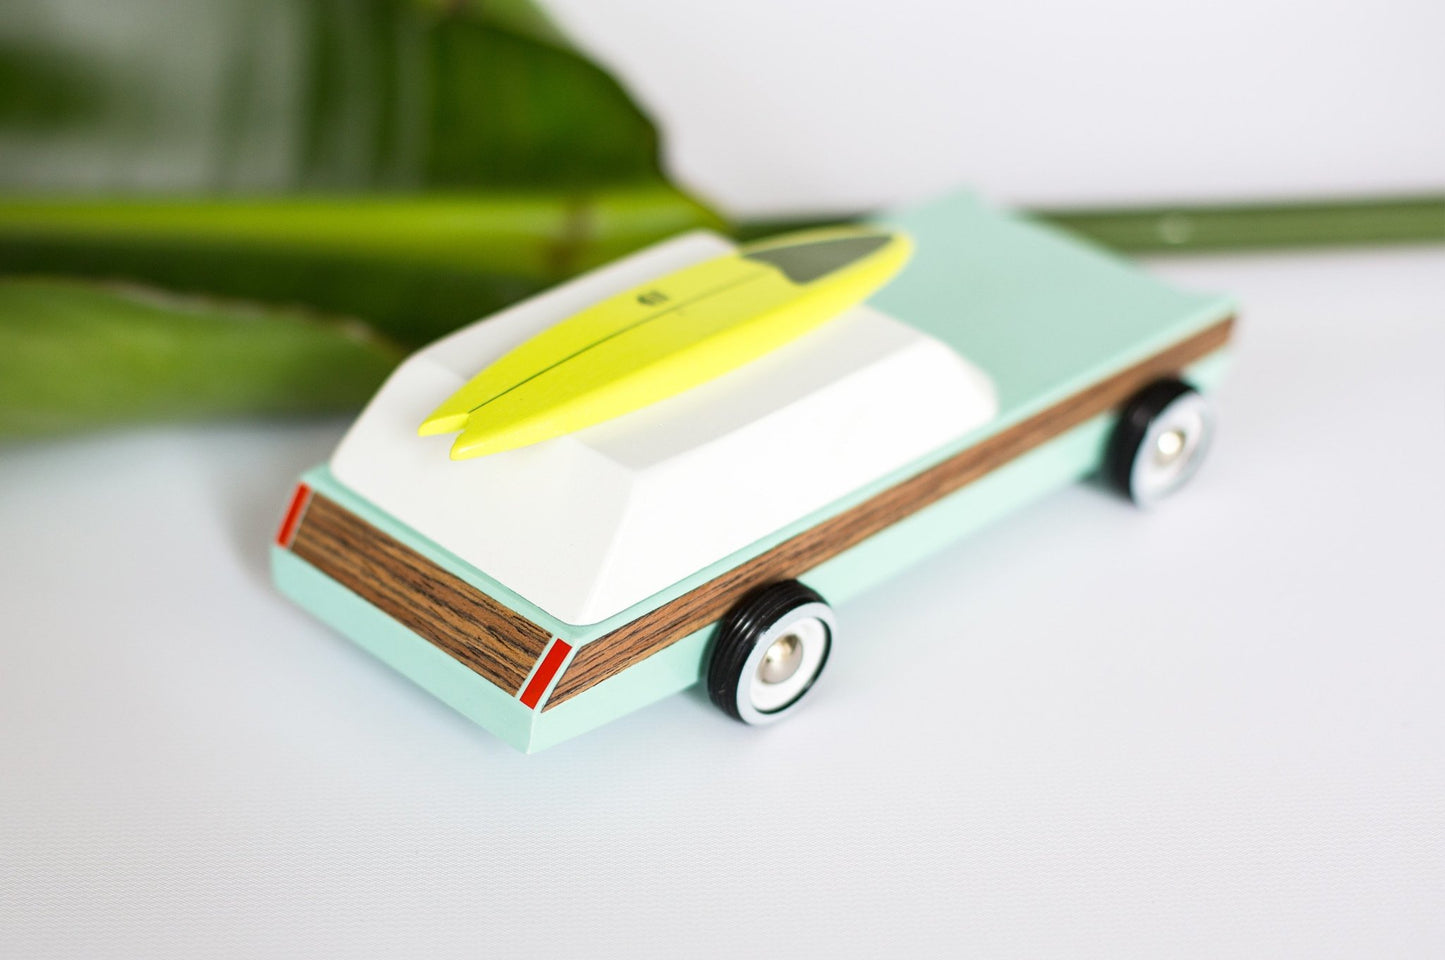 Candylab Toys Woodie Redux with Surfboard - Modern Vintage Station Wagon - Wood Wood Toys Canada's Favourite Montessori Toy Store